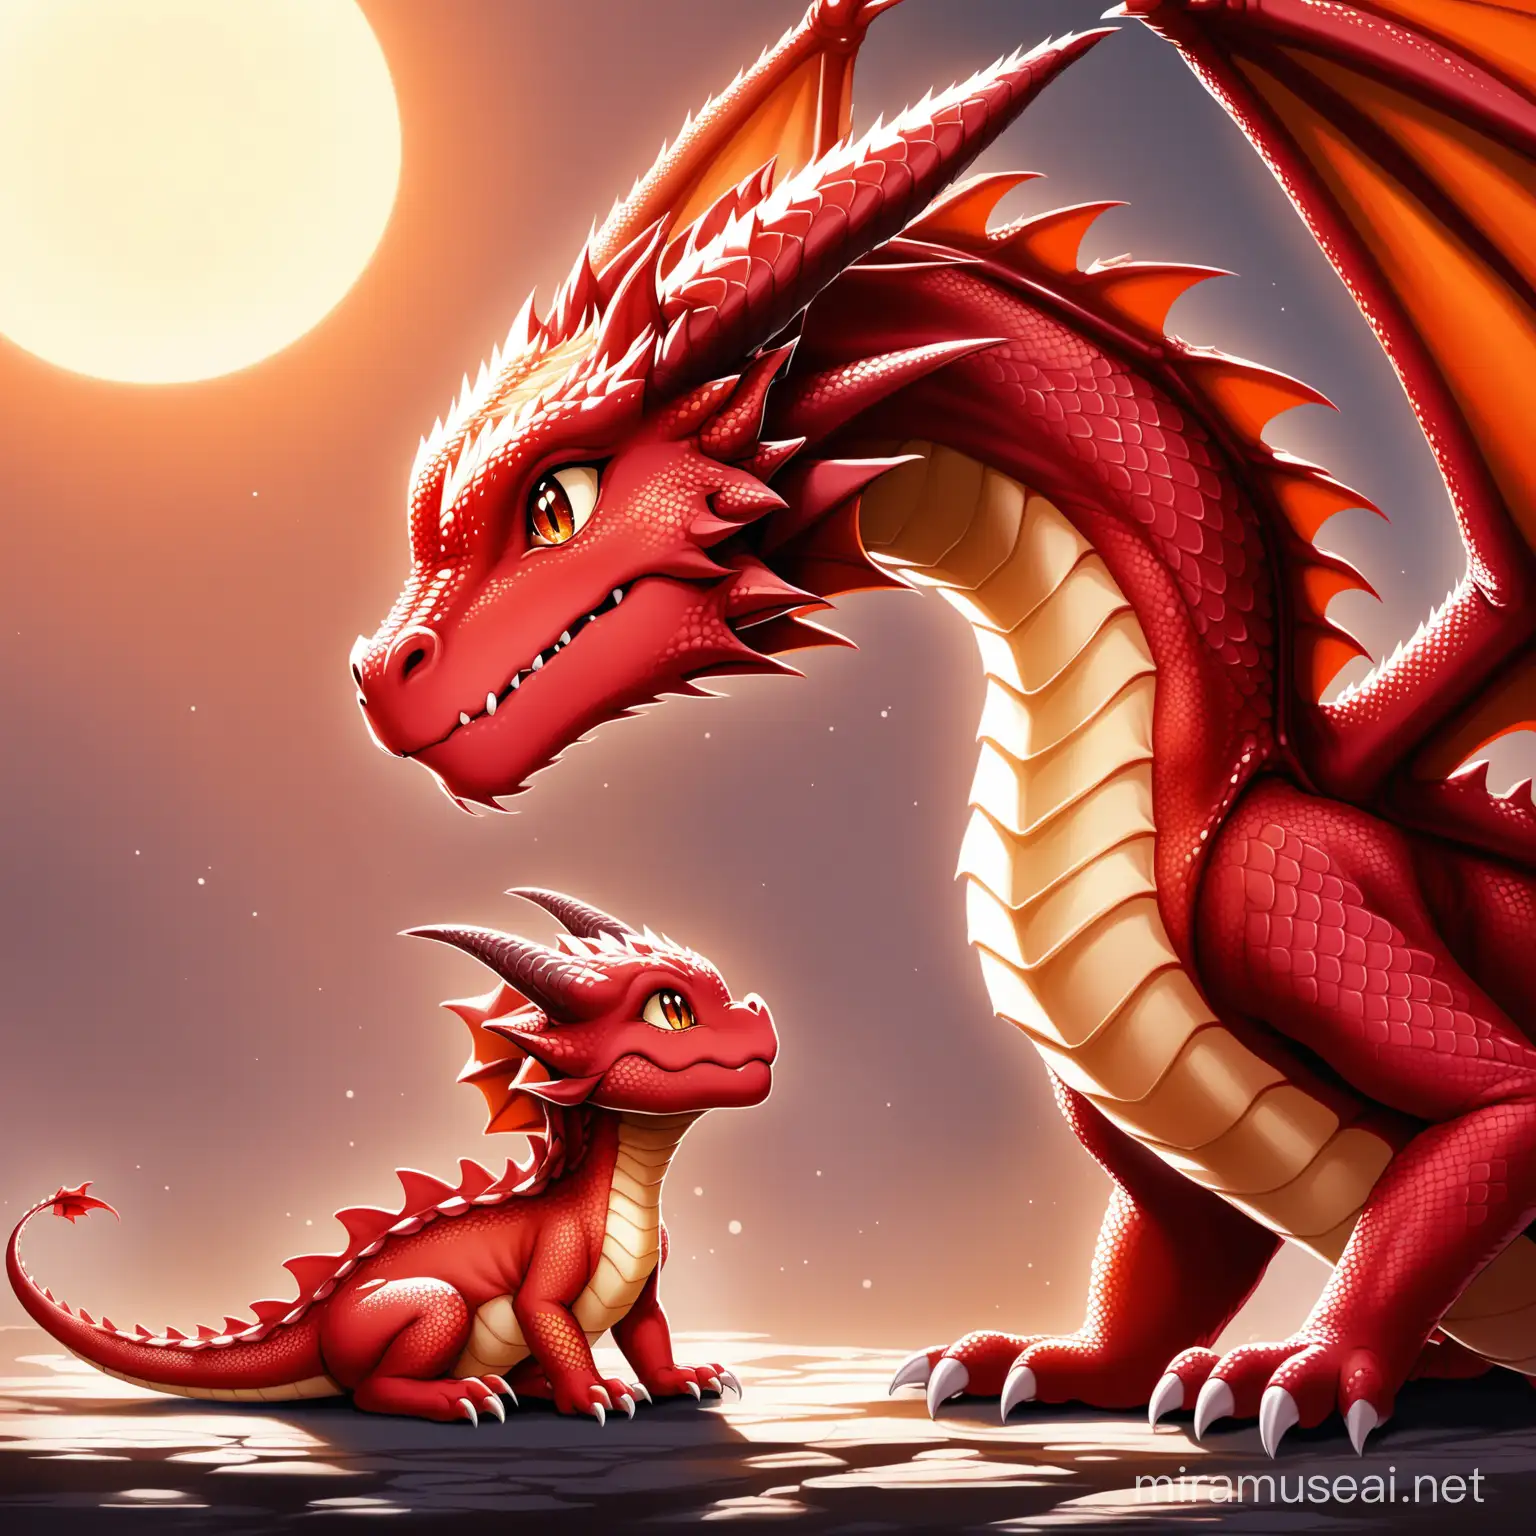 Adorable Red Baby Dragon Gazing at its Mother